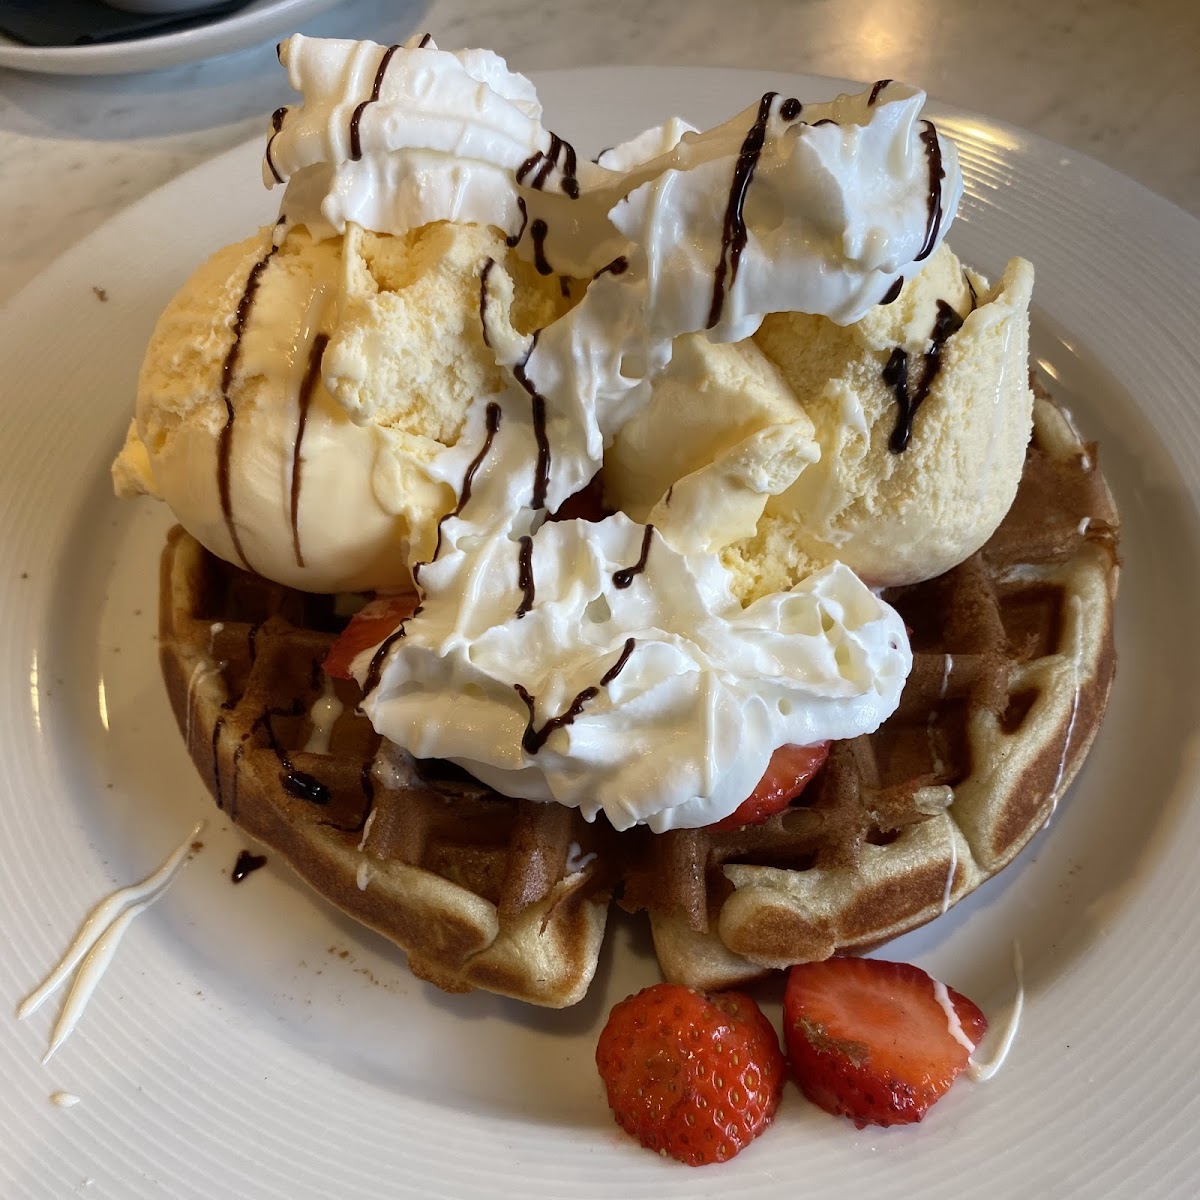 Gluten-Free Waffles at The West Essex Diner